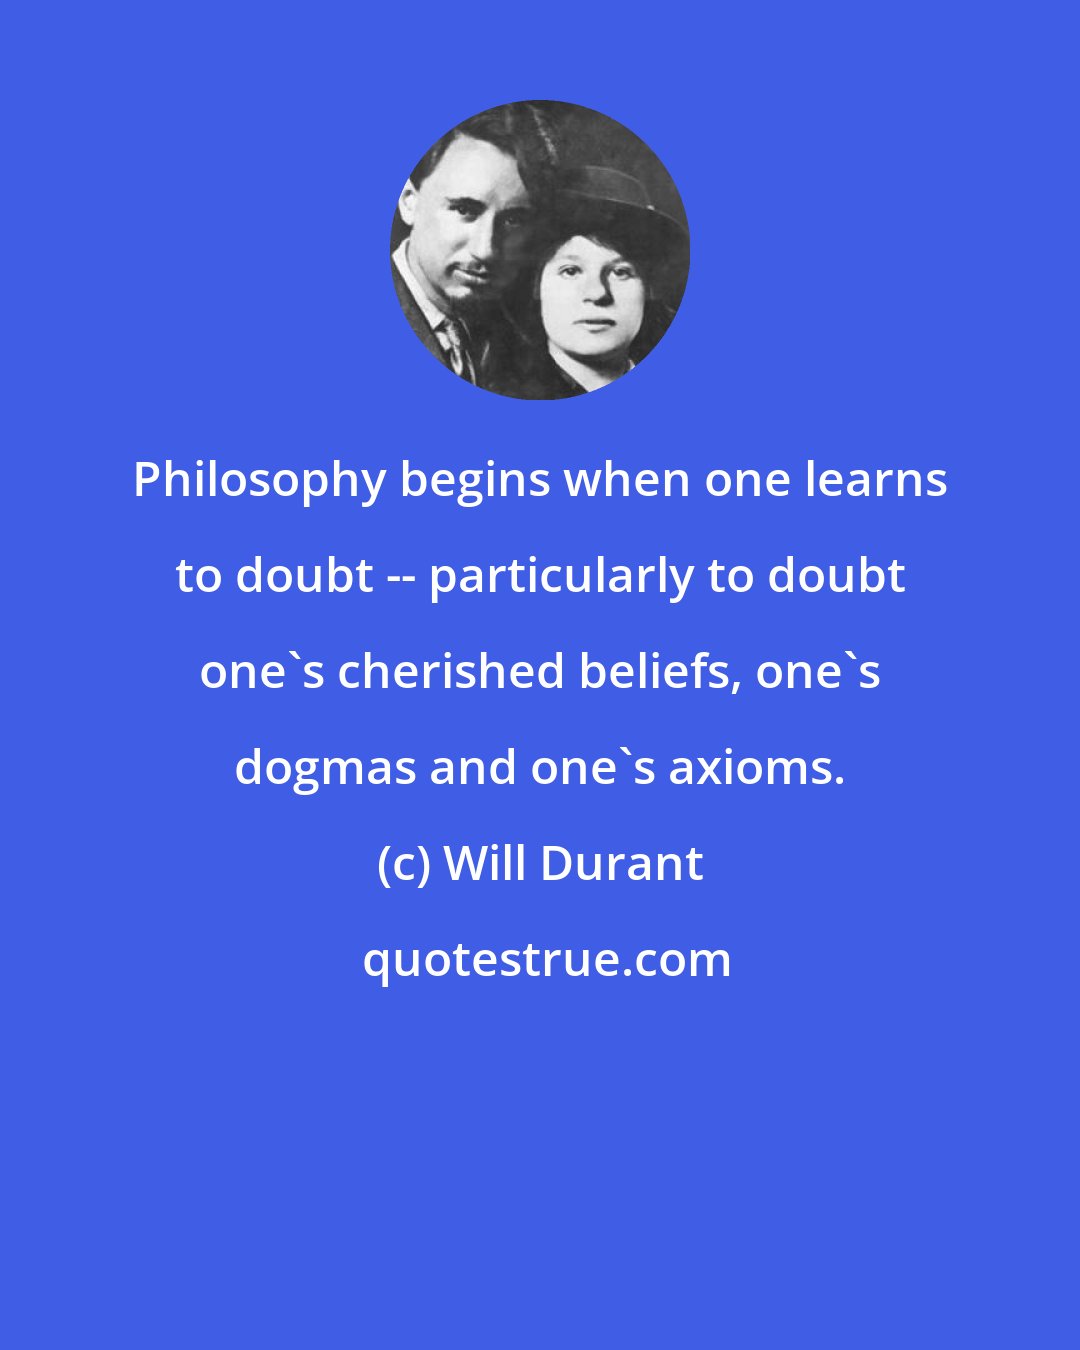 Will Durant: Philosophy begins when one learns to doubt -- particularly to doubt one's cherished beliefs, one's dogmas and one's axioms.